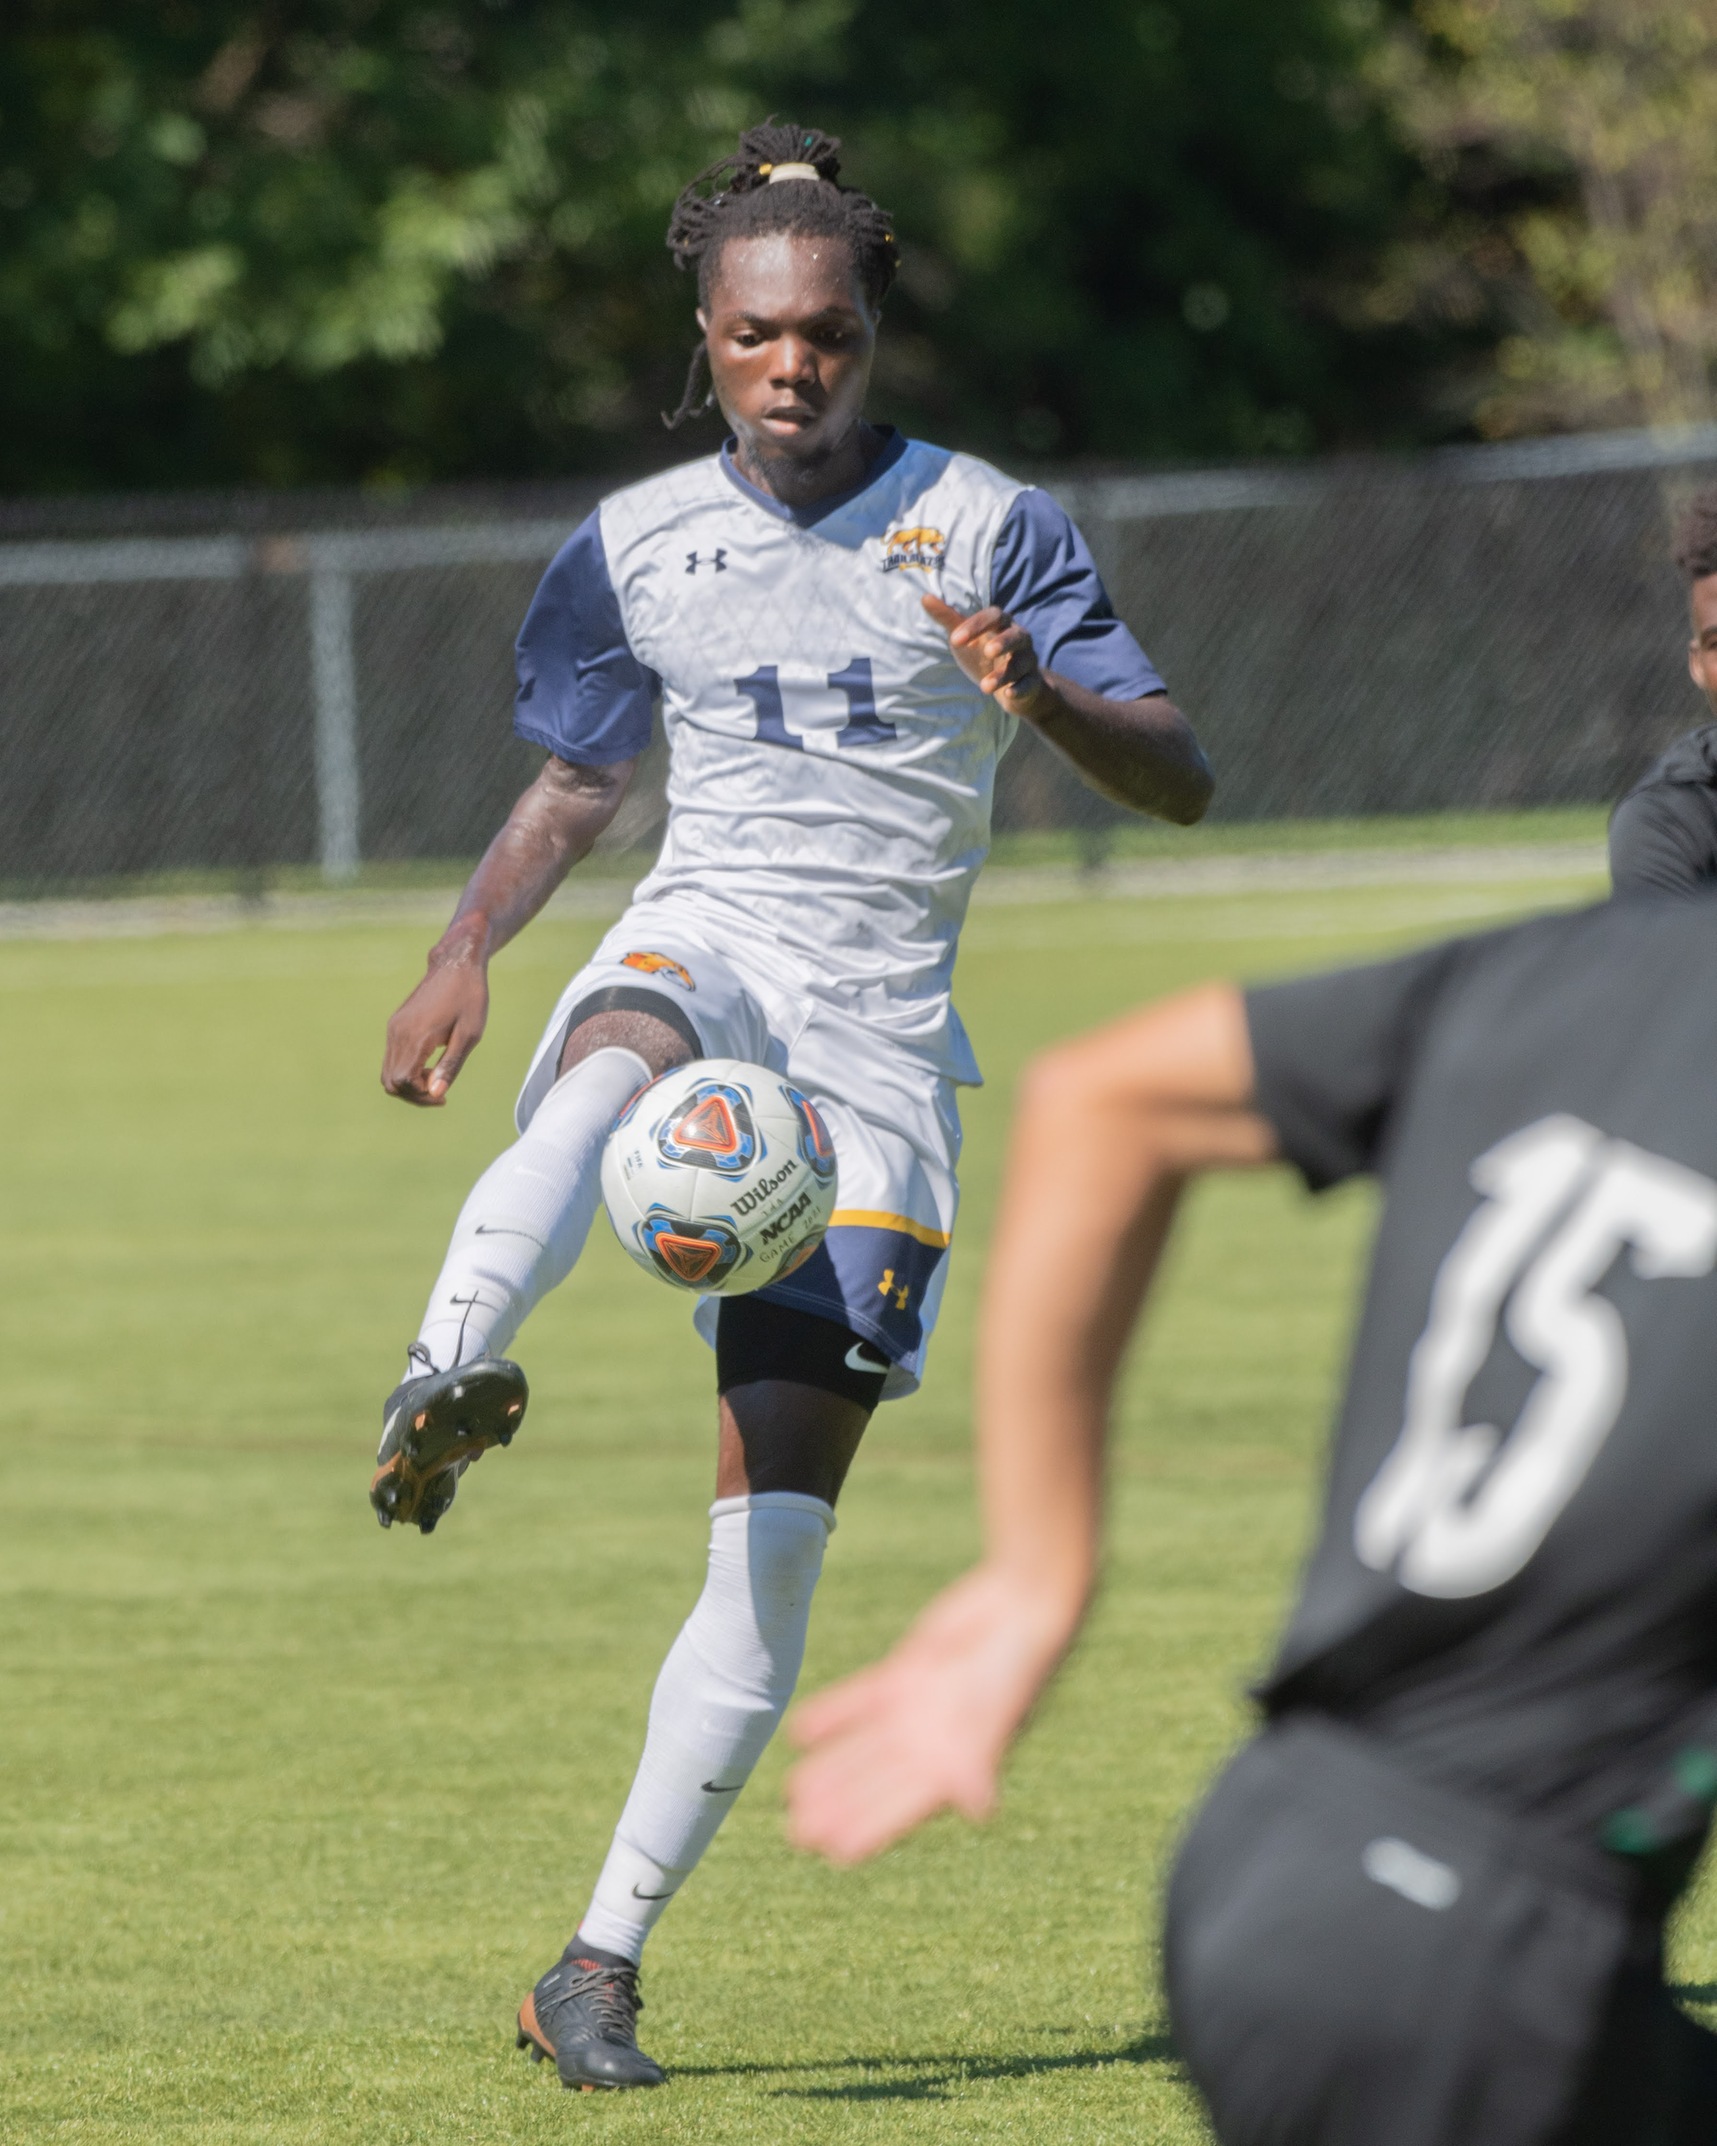 Men's Soccer tripped up at home by Maritime 2-1